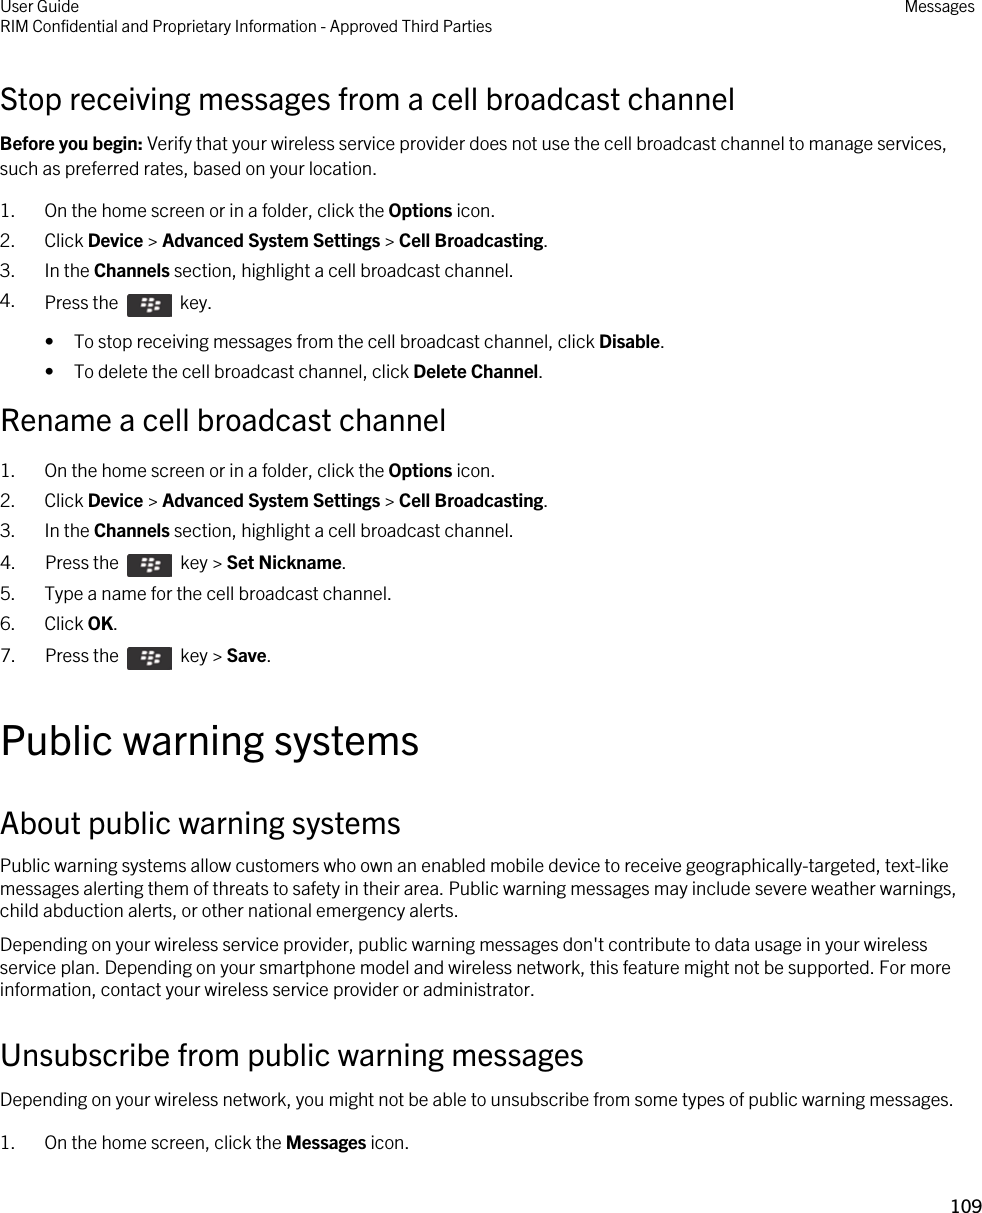 Stop receiving messages from a cell broadcast channelBefore you begin: Verify that your wireless service provider does not use the cell broadcast channel to manage services, such as preferred rates, based on your location.1. On the home screen or in a folder, click the Options icon.2. Click Device &gt; Advanced System Settings &gt; Cell Broadcasting.3. In the Channels section, highlight a cell broadcast channel.4. Press the    key. • To stop receiving messages from the cell broadcast channel, click Disable.• To delete the cell broadcast channel, click Delete Channel.Rename a cell broadcast channel1. On the home screen or in a folder, click the Options icon.2. Click Device &gt; Advanced System Settings &gt; Cell Broadcasting.3. In the Channels section, highlight a cell broadcast channel.4.  Press the    key &gt; Set Nickname.5. Type a name for the cell broadcast channel.6. Click OK.7.  Press the    key &gt; Save. Public warning systemsAbout public warning systemsPublic warning systems allow customers who own an enabled mobile device to receive geographically-targeted, text-like messages alerting them of threats to safety in their area. Public warning messages may include severe weather warnings, child abduction alerts, or other national emergency alerts.Depending on your wireless service provider, public warning messages don&apos;t contribute to data usage in your wireless service plan. Depending on your smartphone model and wireless network, this feature might not be supported. For more information, contact your wireless service provider or administrator.Unsubscribe from public warning messagesDepending on your wireless network, you might not be able to unsubscribe from some types of public warning messages.1. On the home screen, click the Messages icon.User GuideRIM Confidential and Proprietary Information - Approved Third Parties Messages109 